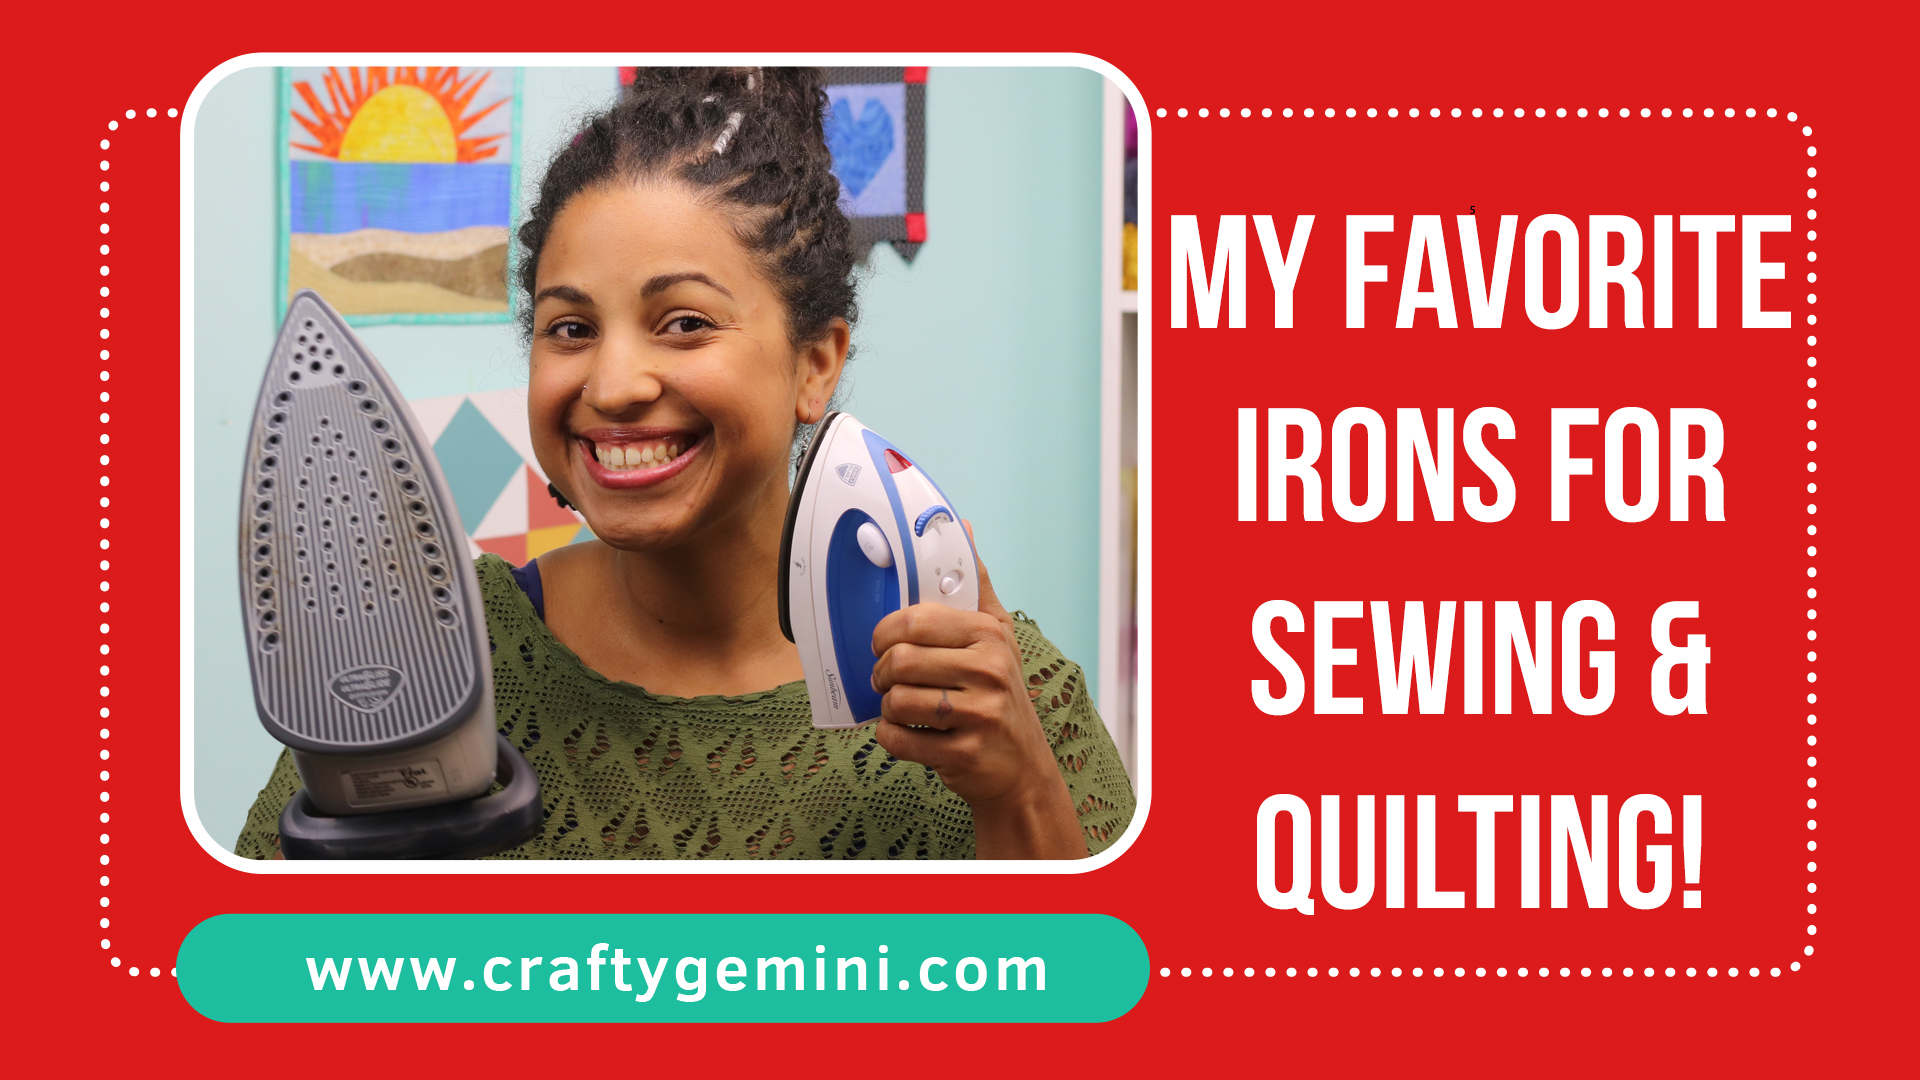 A video review of @CraftyGemini's favorite irons to use for sewing & quilting projects.